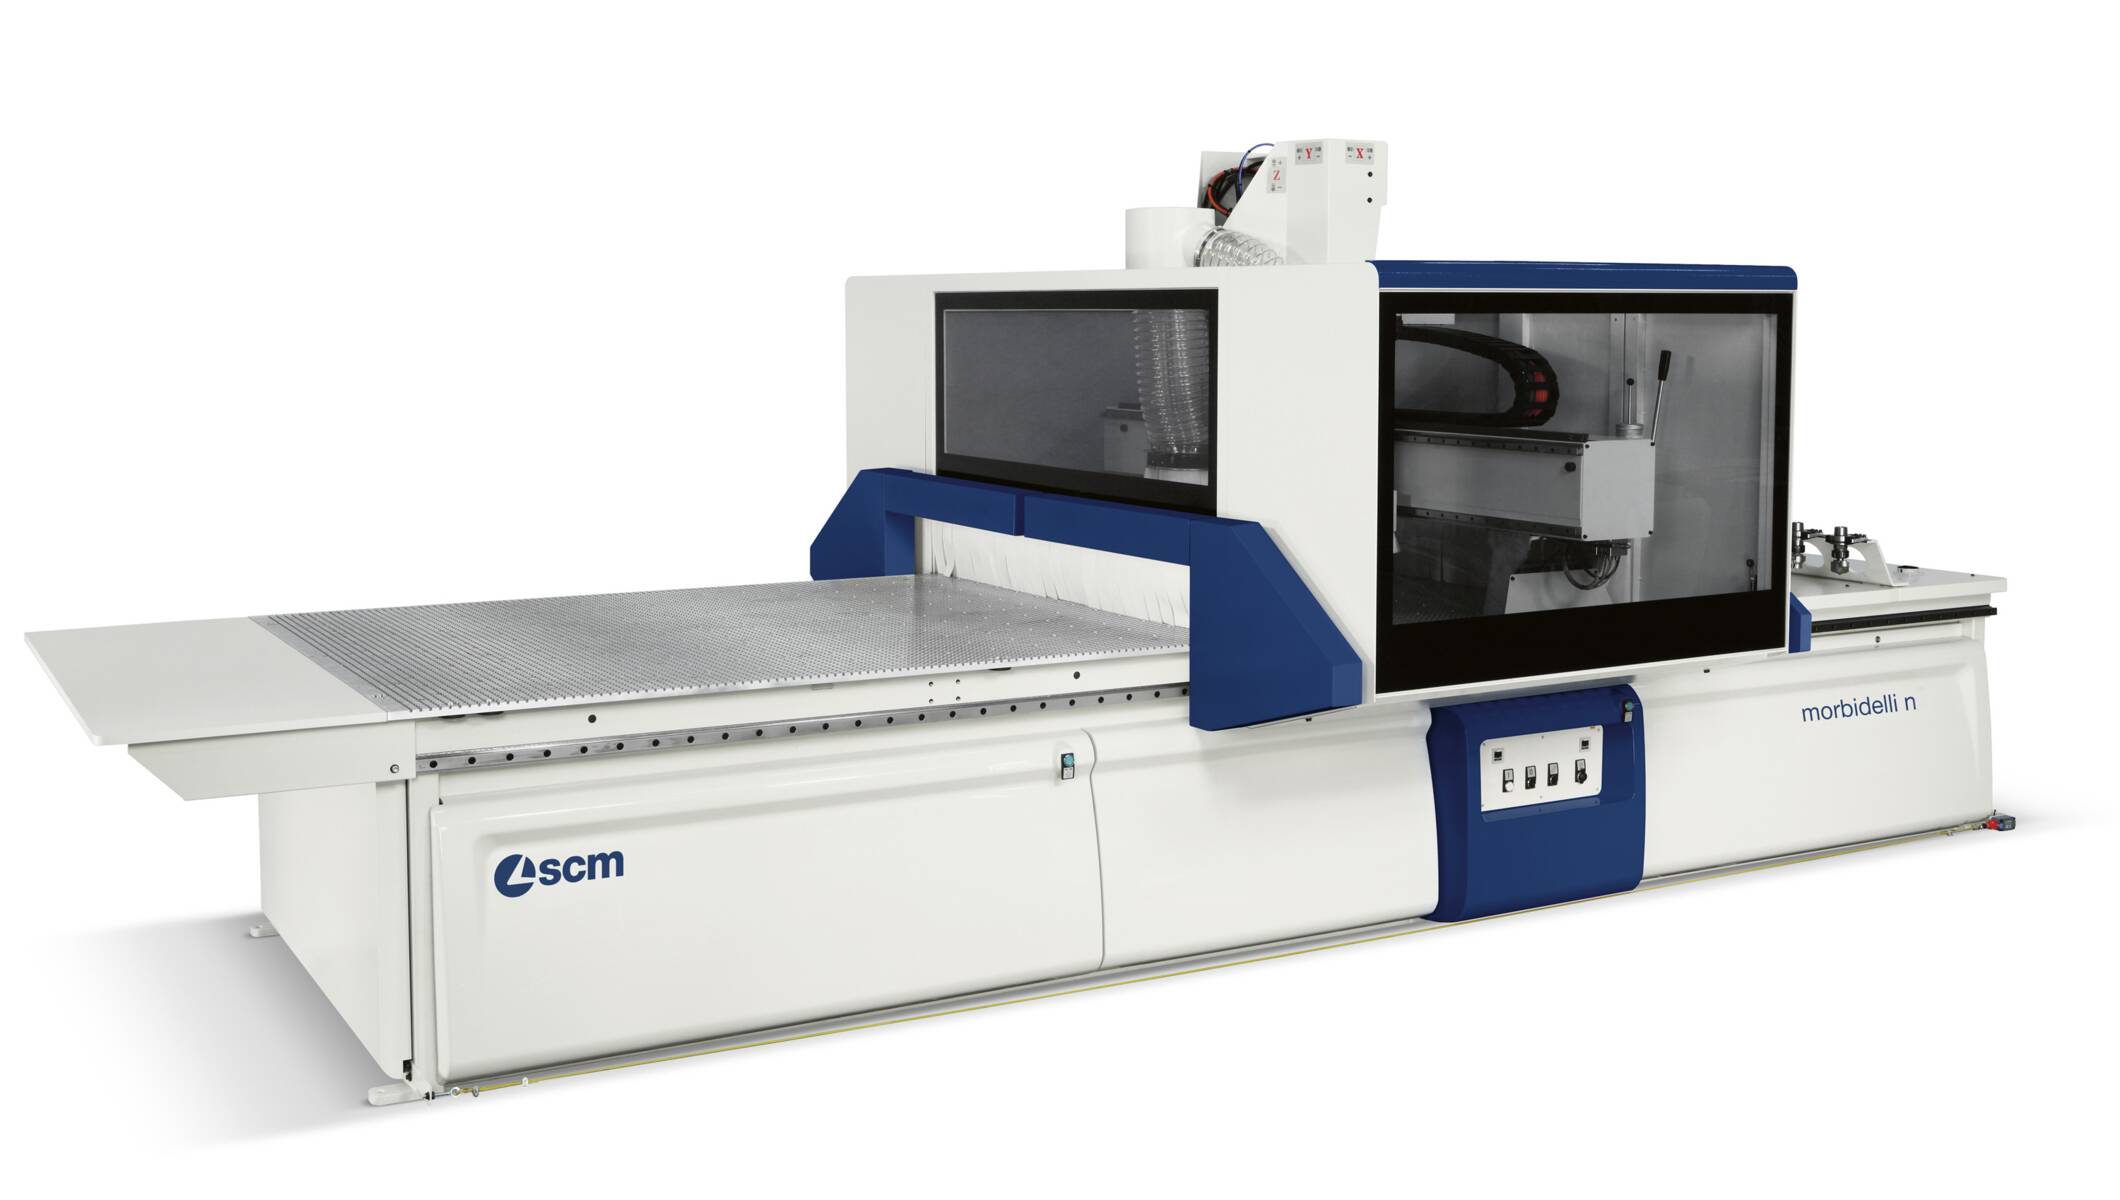 CNC Machining Centers - CNC Nesting Machining Centers for routing and drilling - morbidelli n